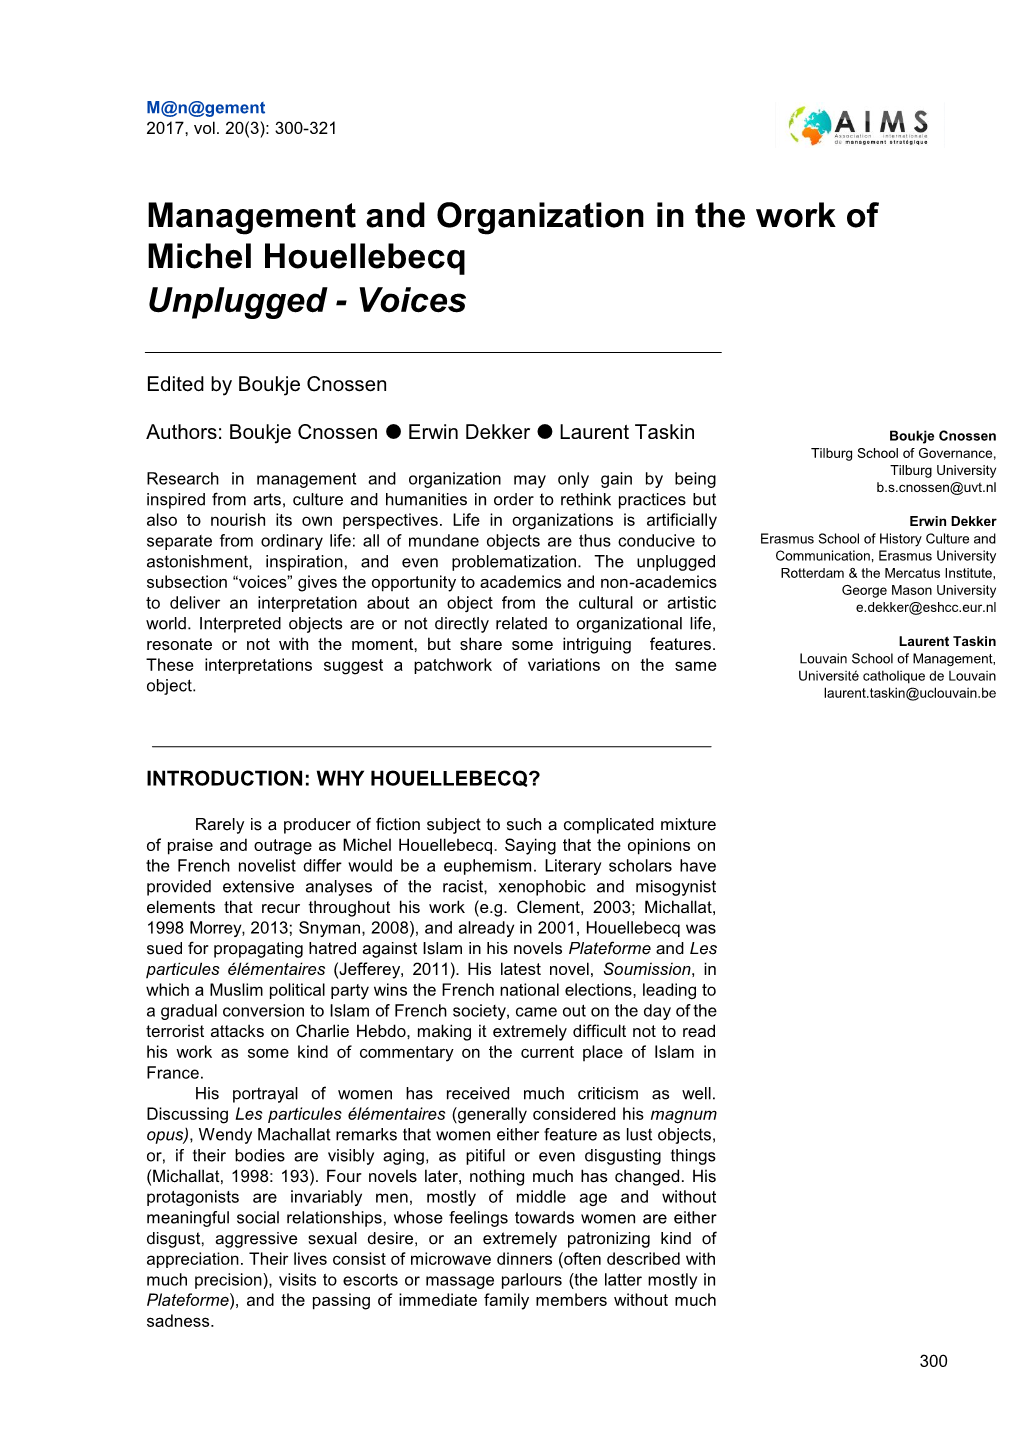 Management and Organization in the Work of Michel Houellebecq Unplugged - Voices